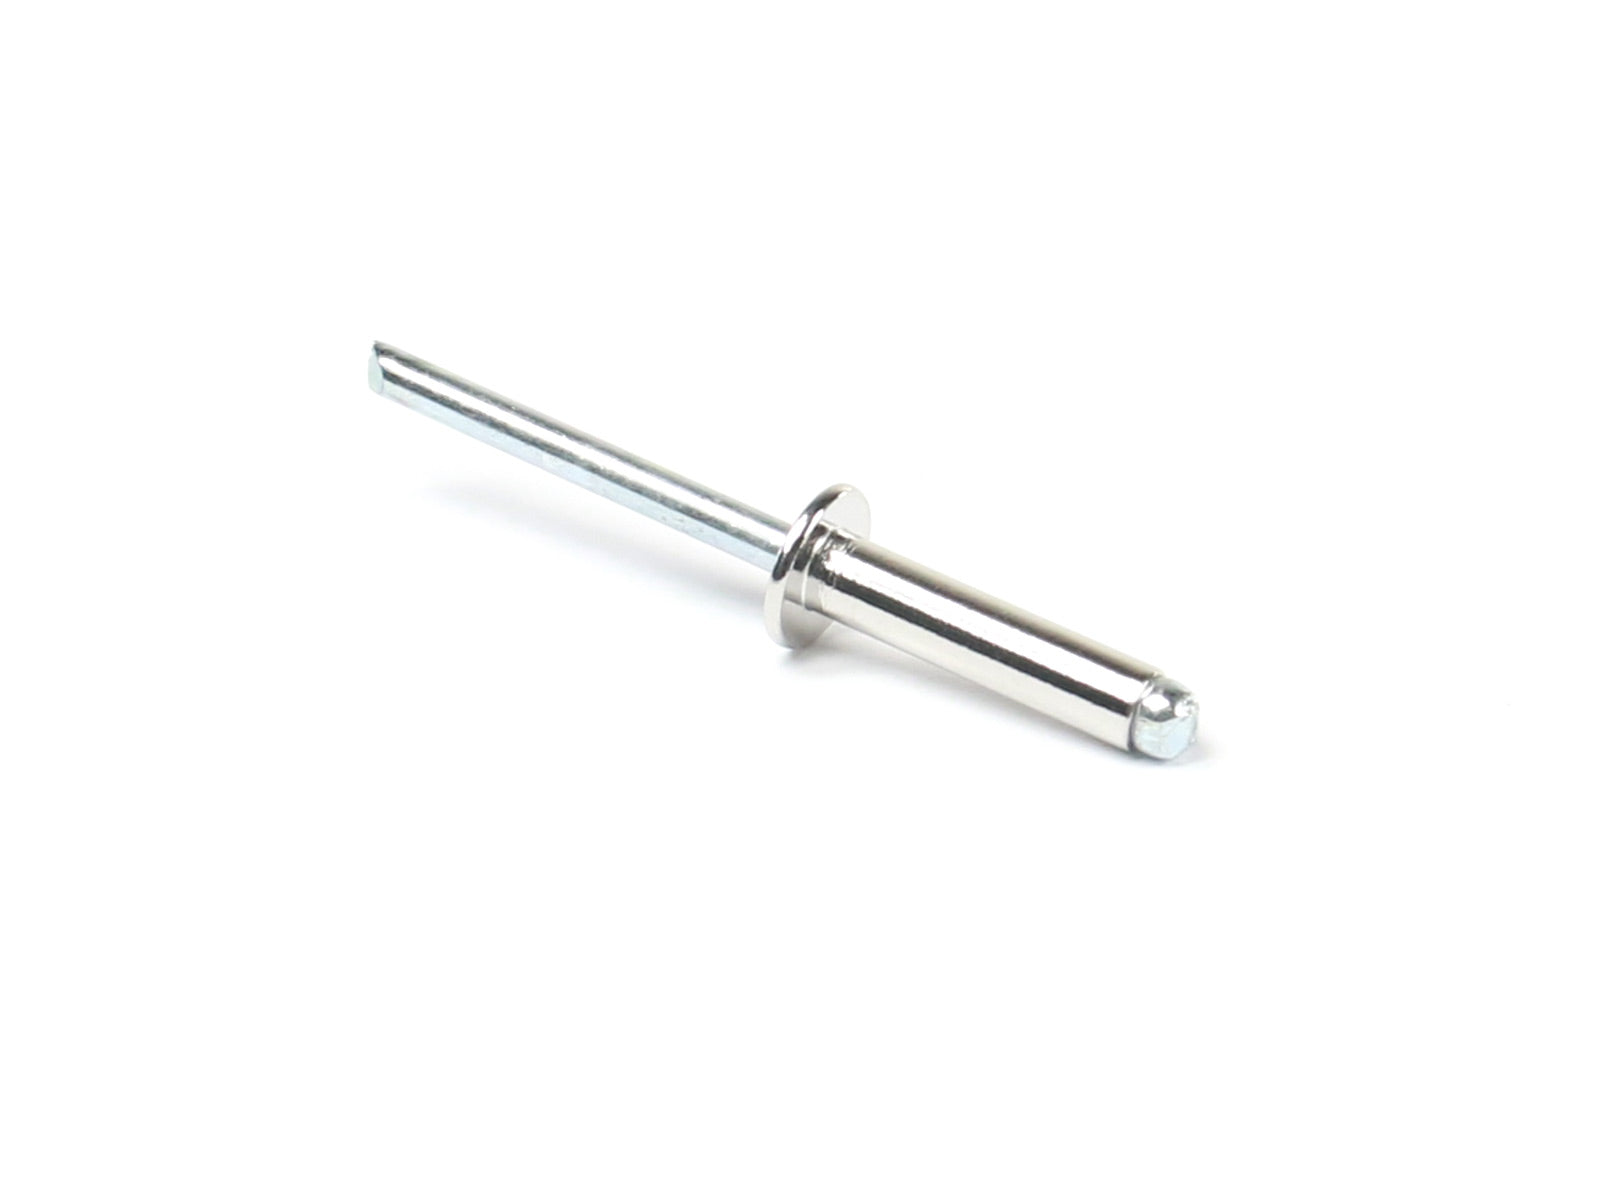 OSP ATA-RIVET-STAINLESS Stainless Steel Rivets for use on high-stress points of OSP cases